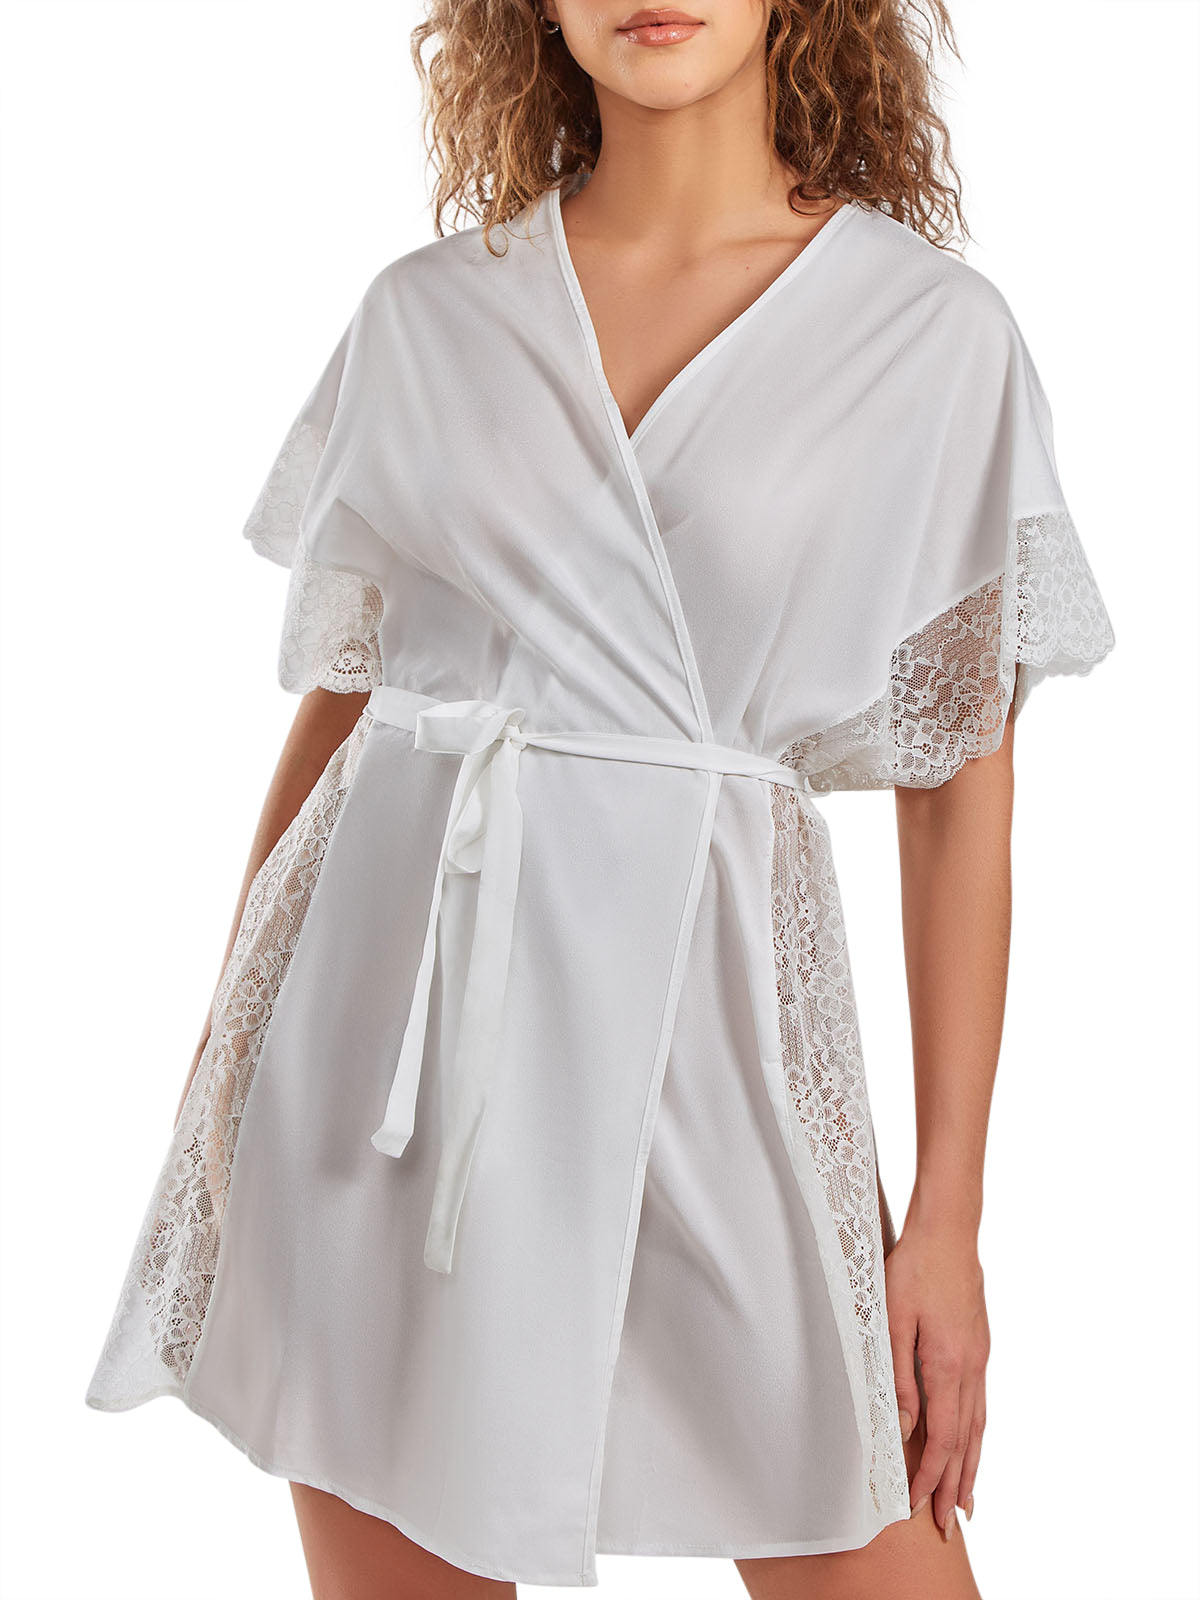 iCollection Sherry Robe